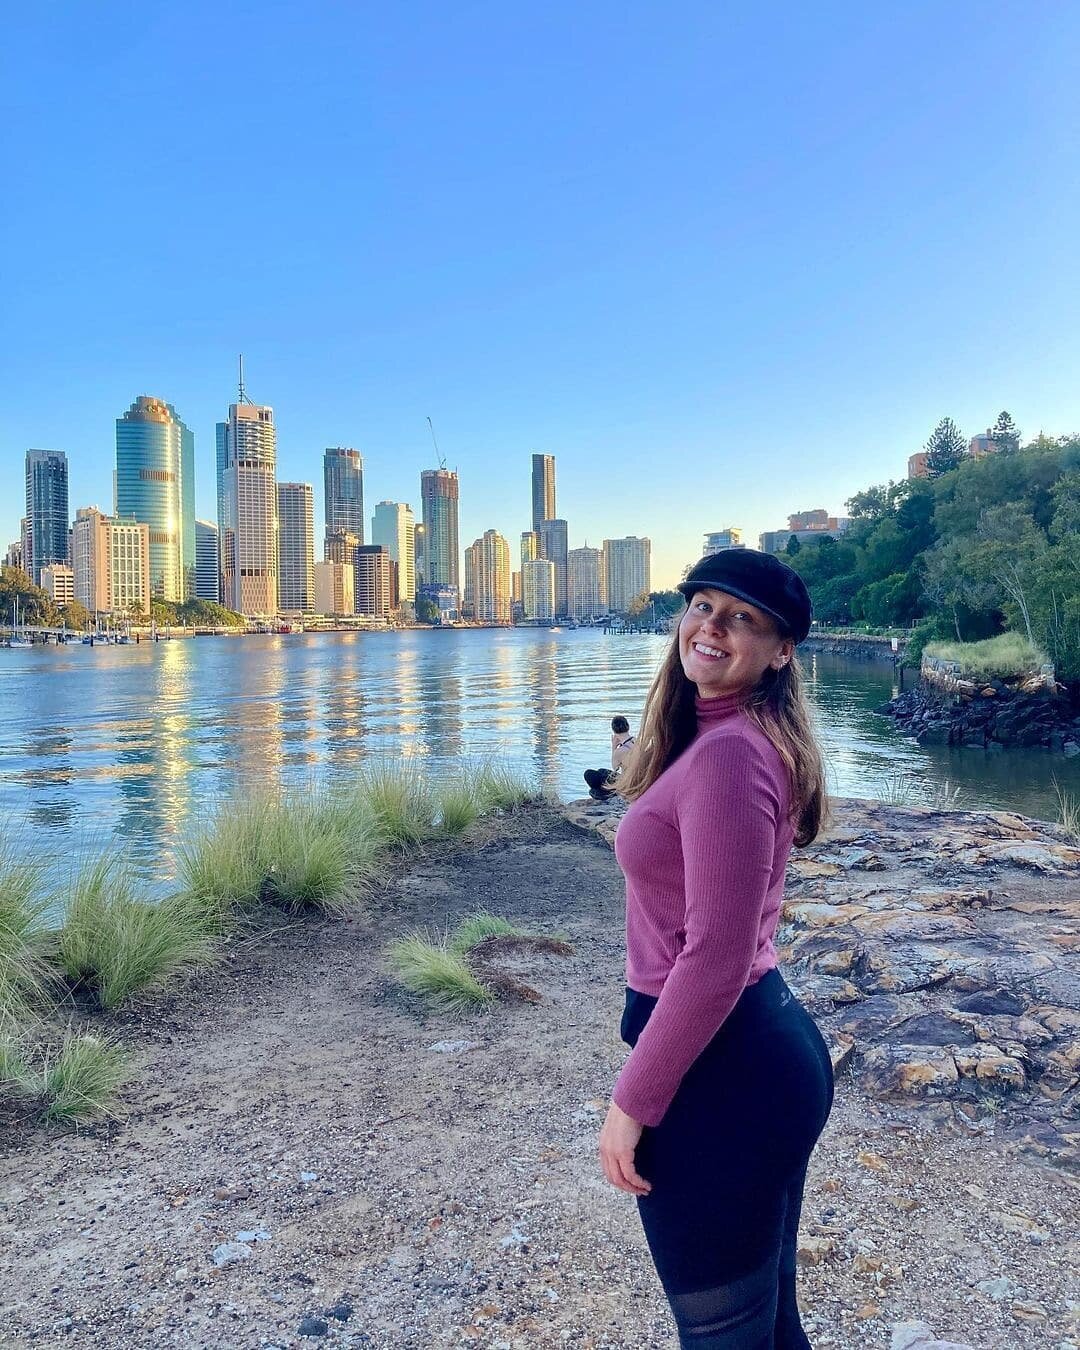 When great views put a smile on your face! 😍😍..&nbsp;

.
Thanks📸@mybrissy @miss_evaj&nbsp;

Share all your moments through #discoverbrisbane

Where's your fave spot for those #viewsofbrisbane?❤👇🏽